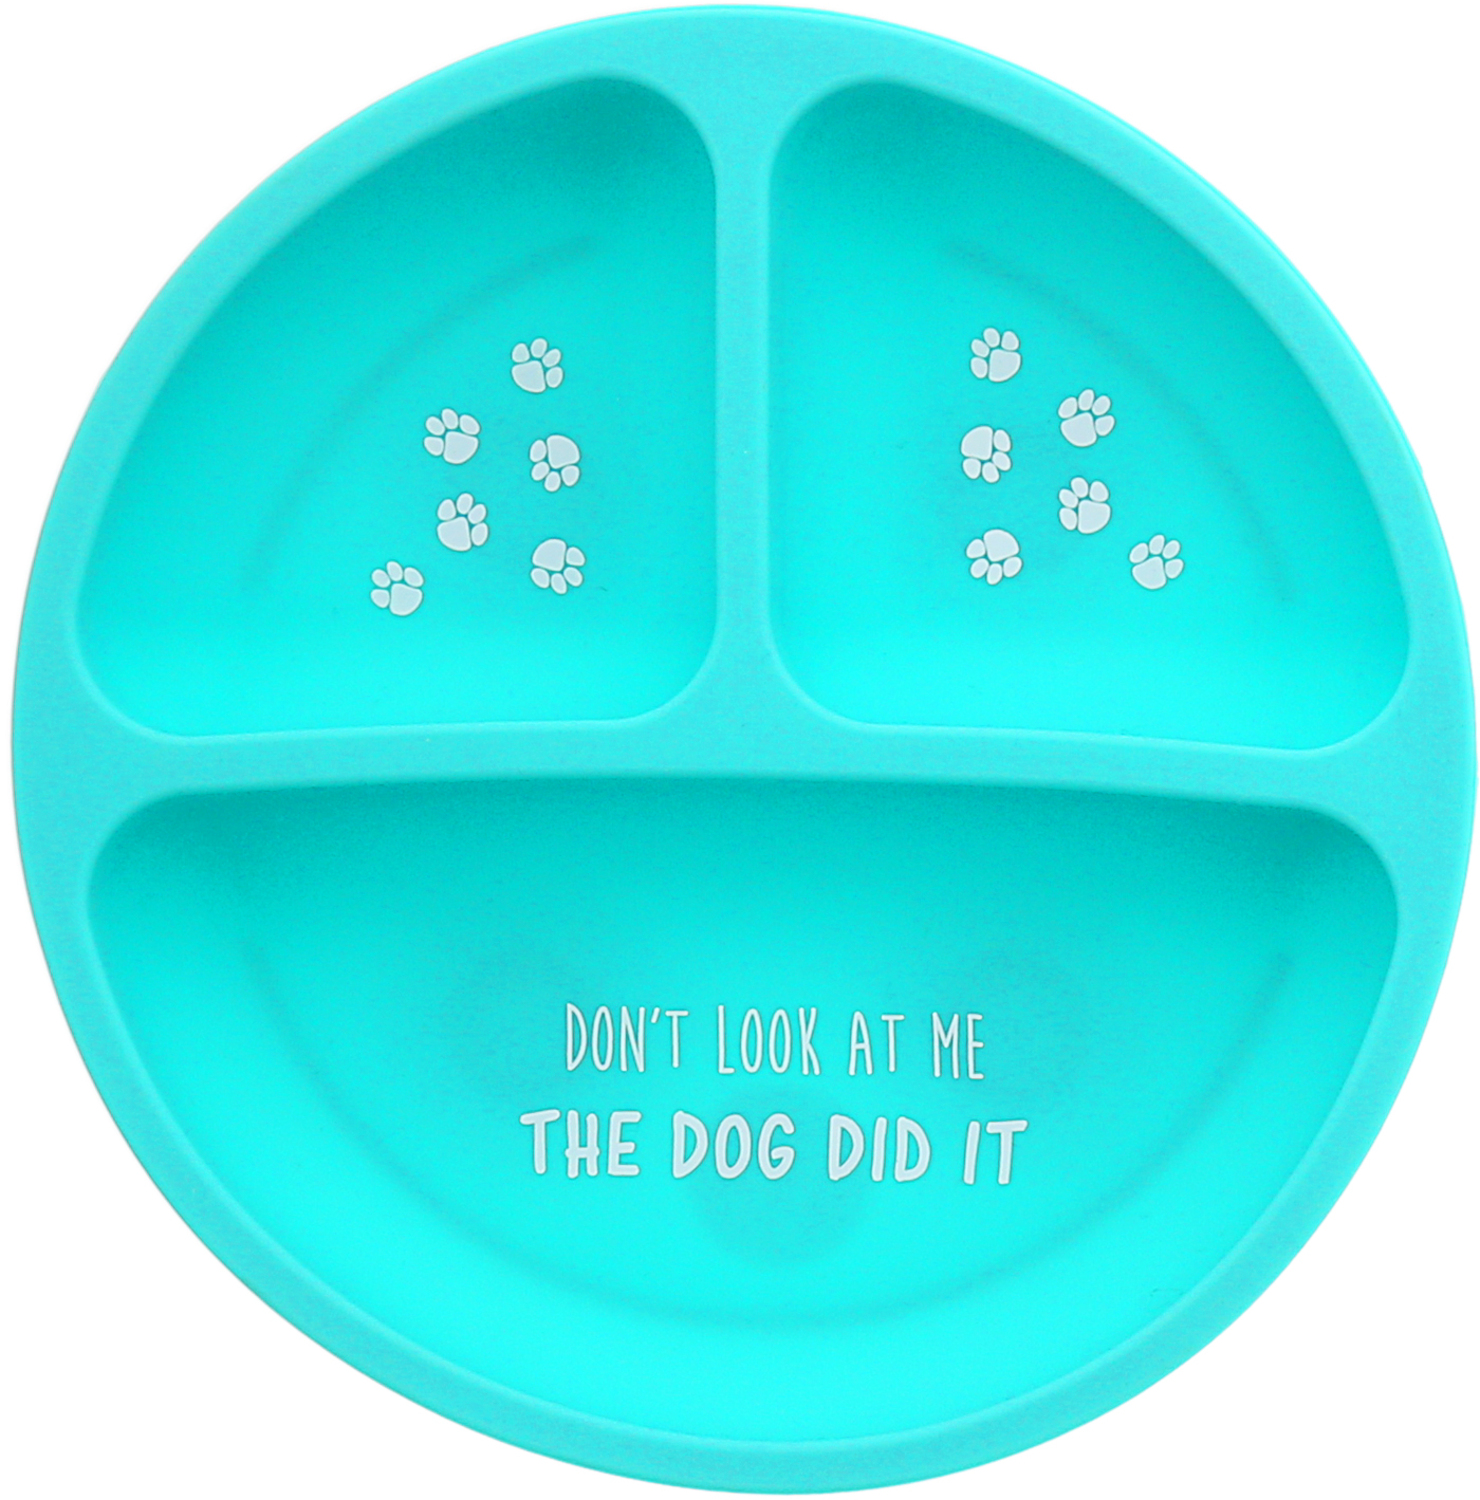 The Dog by Sidewalk Talk - The Dog - 7.75" Divided Silicone Suction Plate